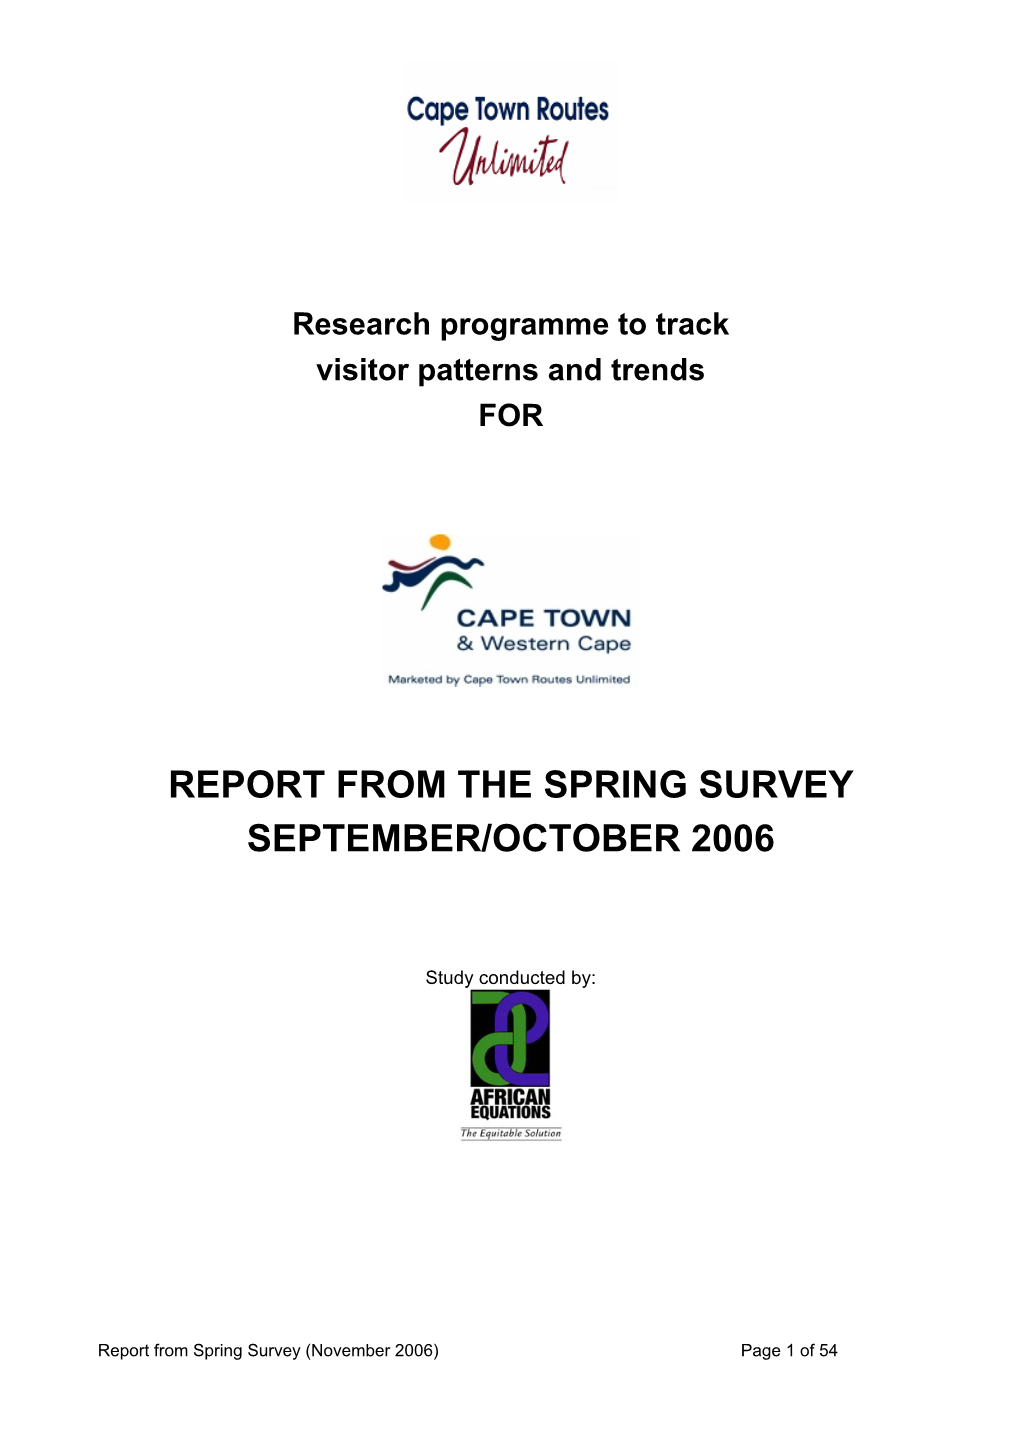 Report from the Spring Survey September/October 2006